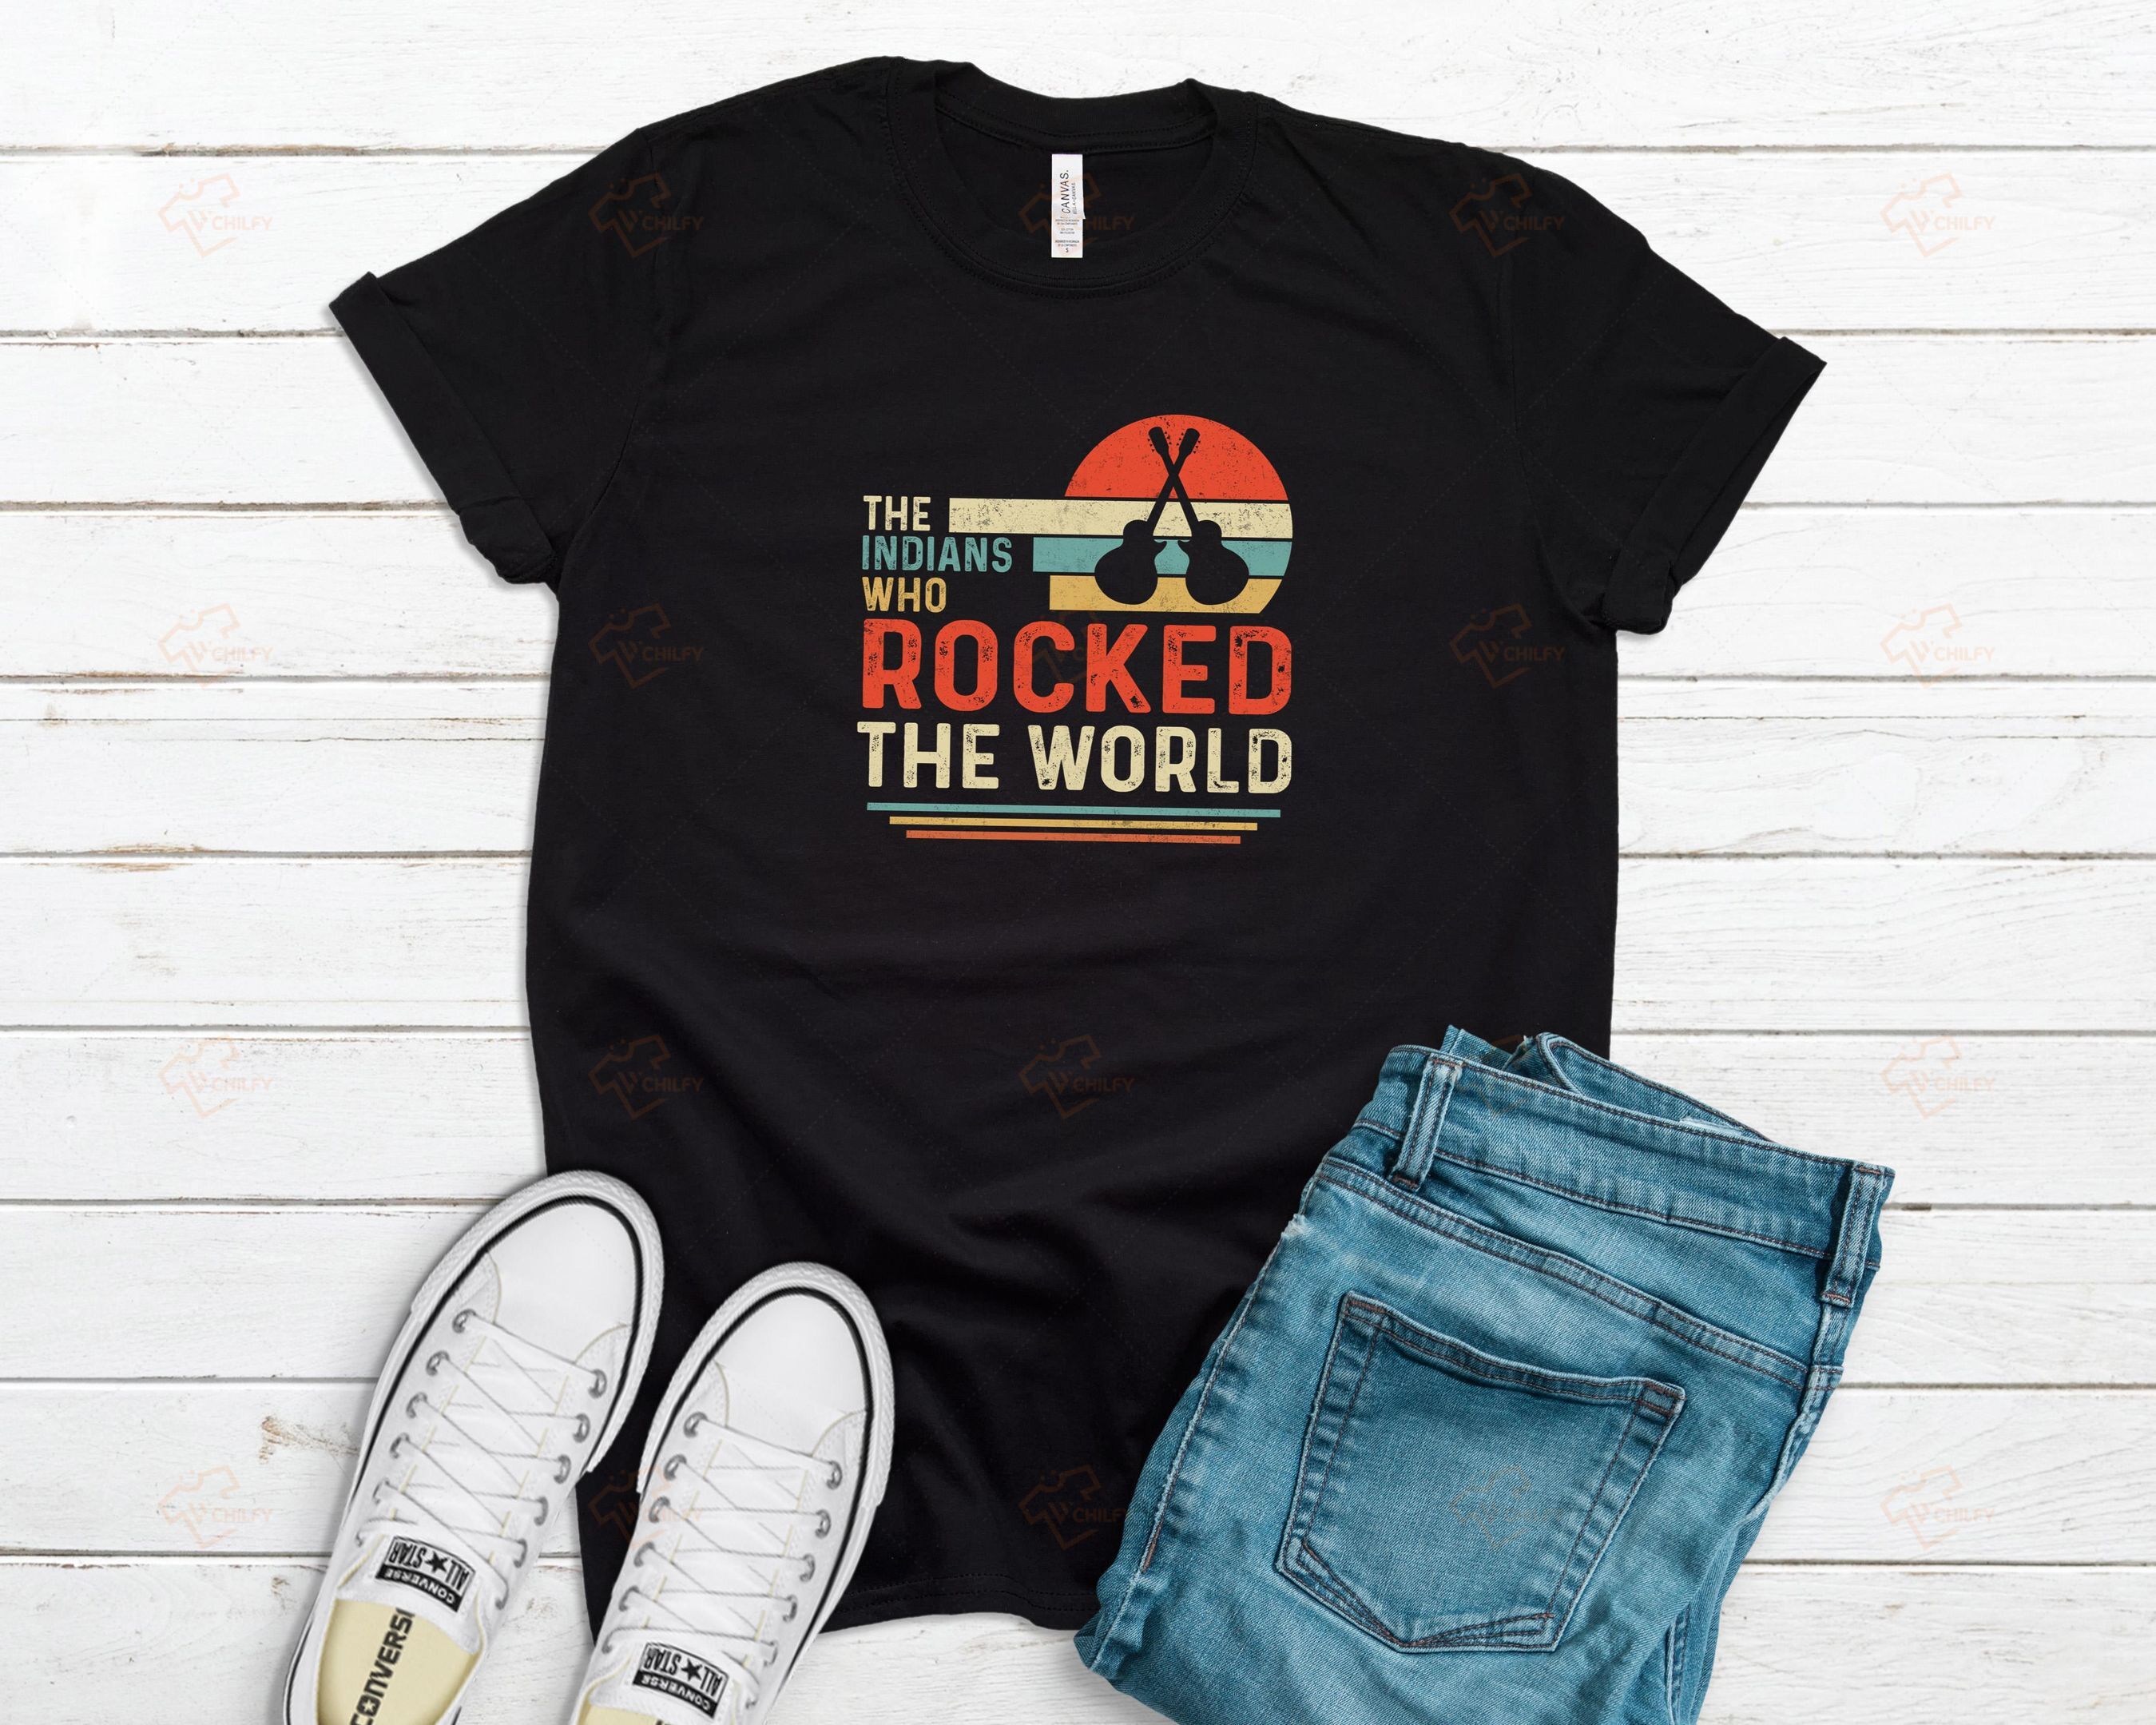 The Indians who rocked the world shirt, badass Native t shirt, Native American shirt, gift for Indigenous people